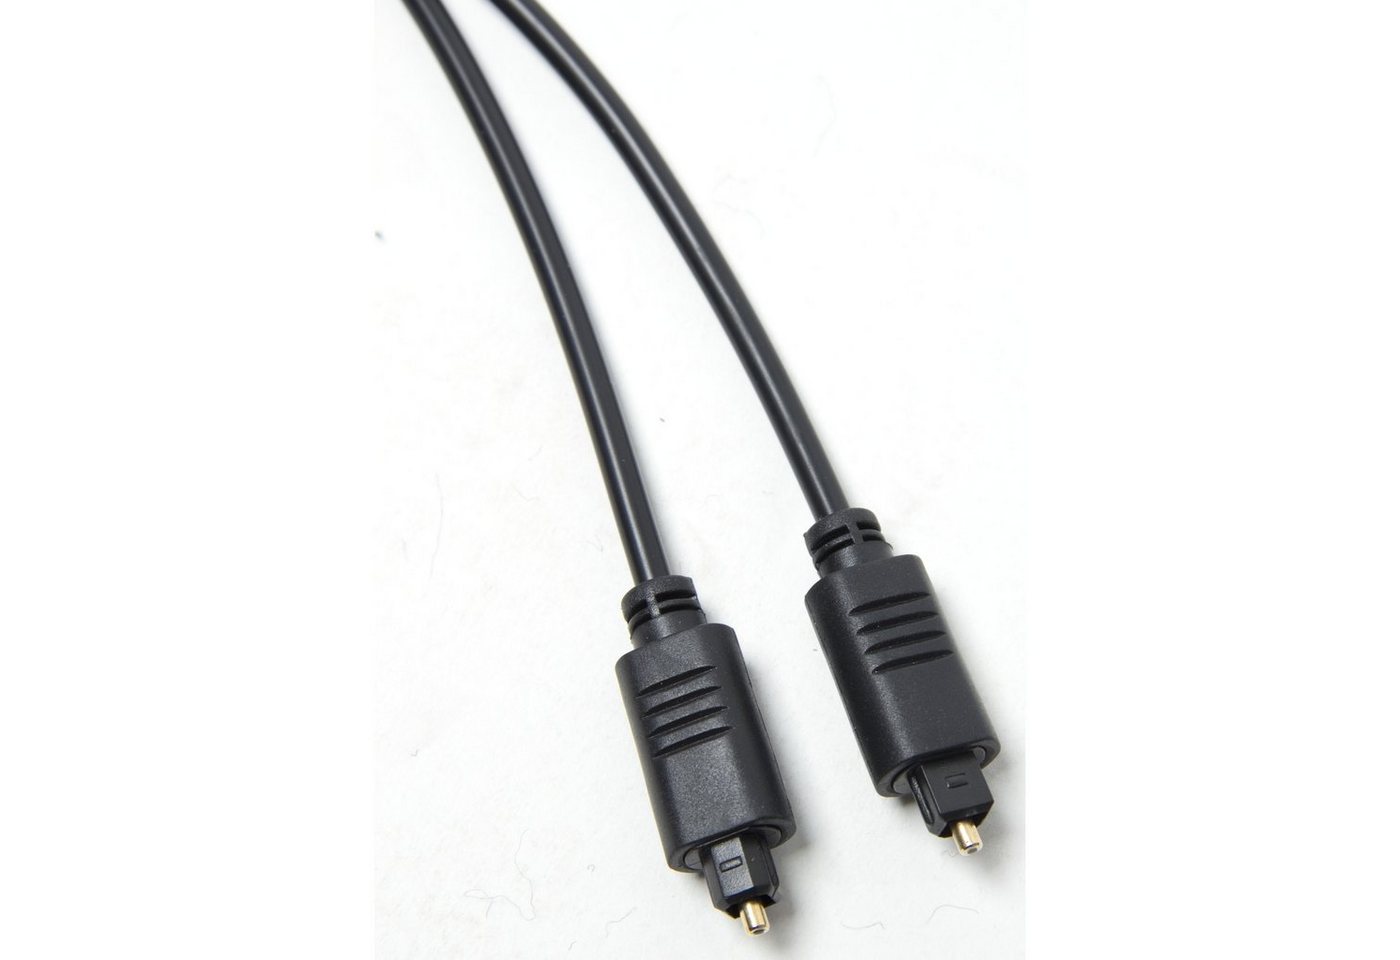 MUSIC STORE Glasfaserkabel, Optical Cable, Reliable Quality, Optical Signal Transmission von MUSIC STORE